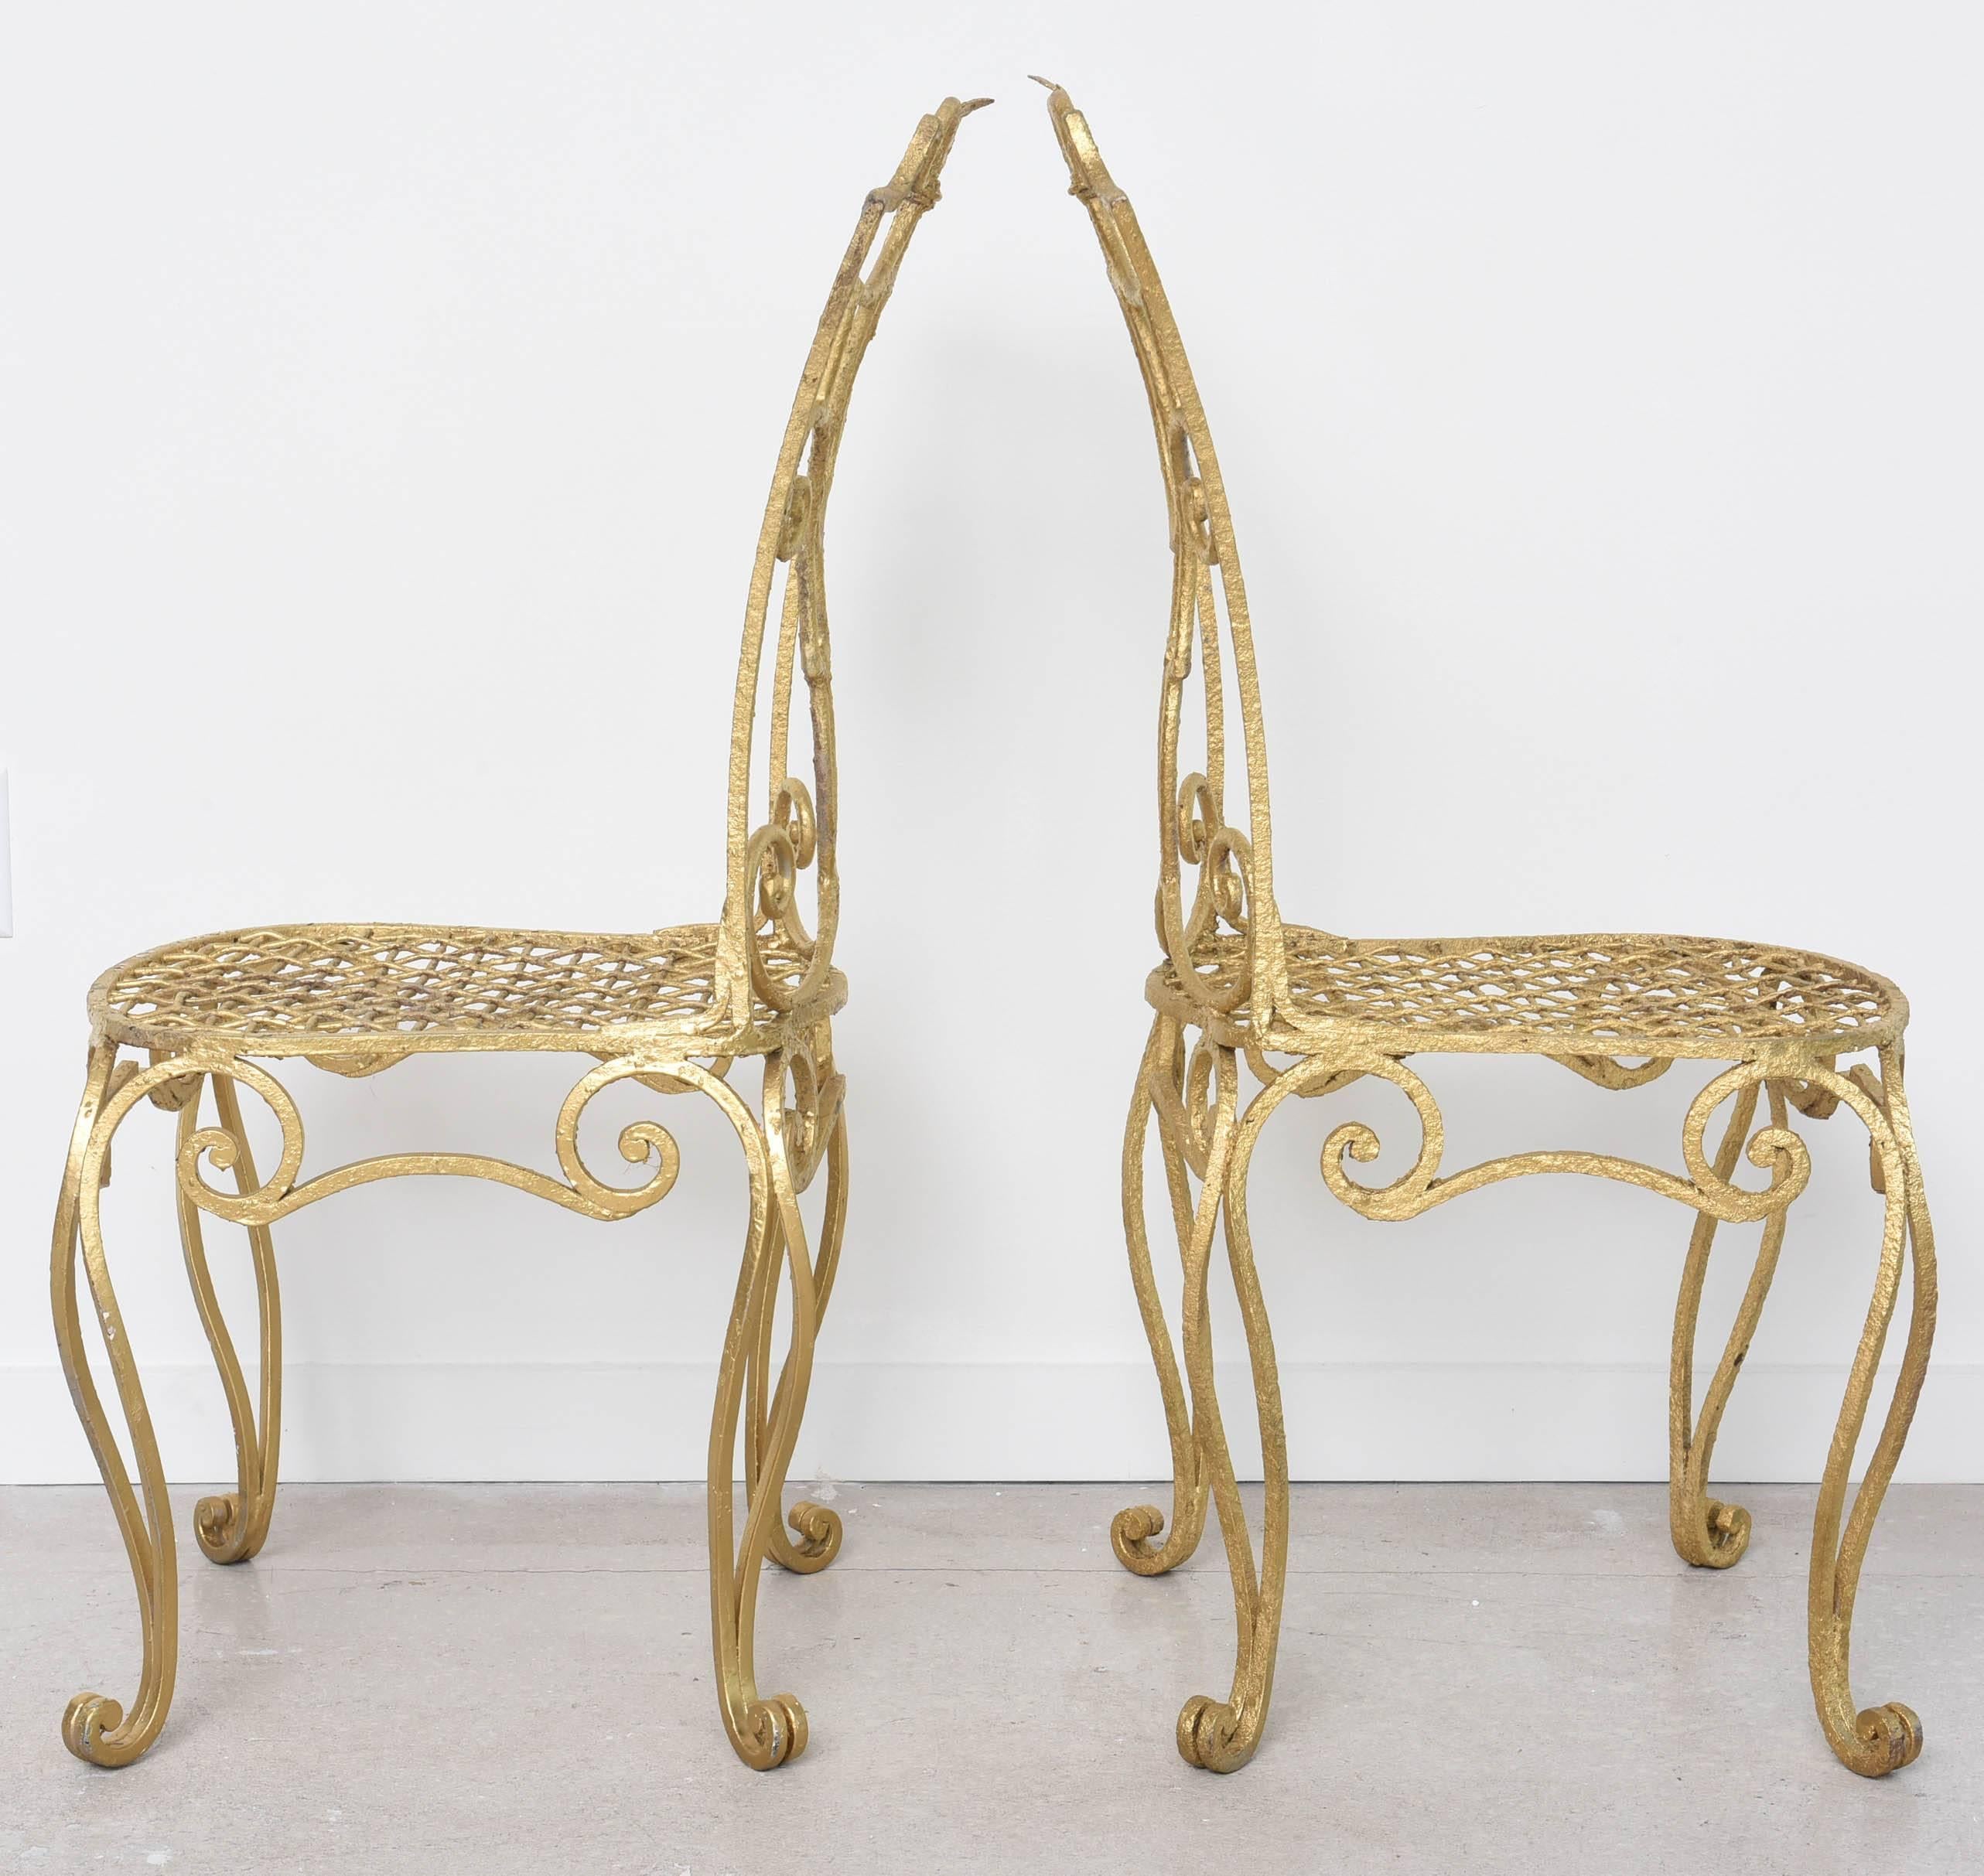 20th Century Pair of French Gilt Metal Chairs by Jean-Charles Moreux